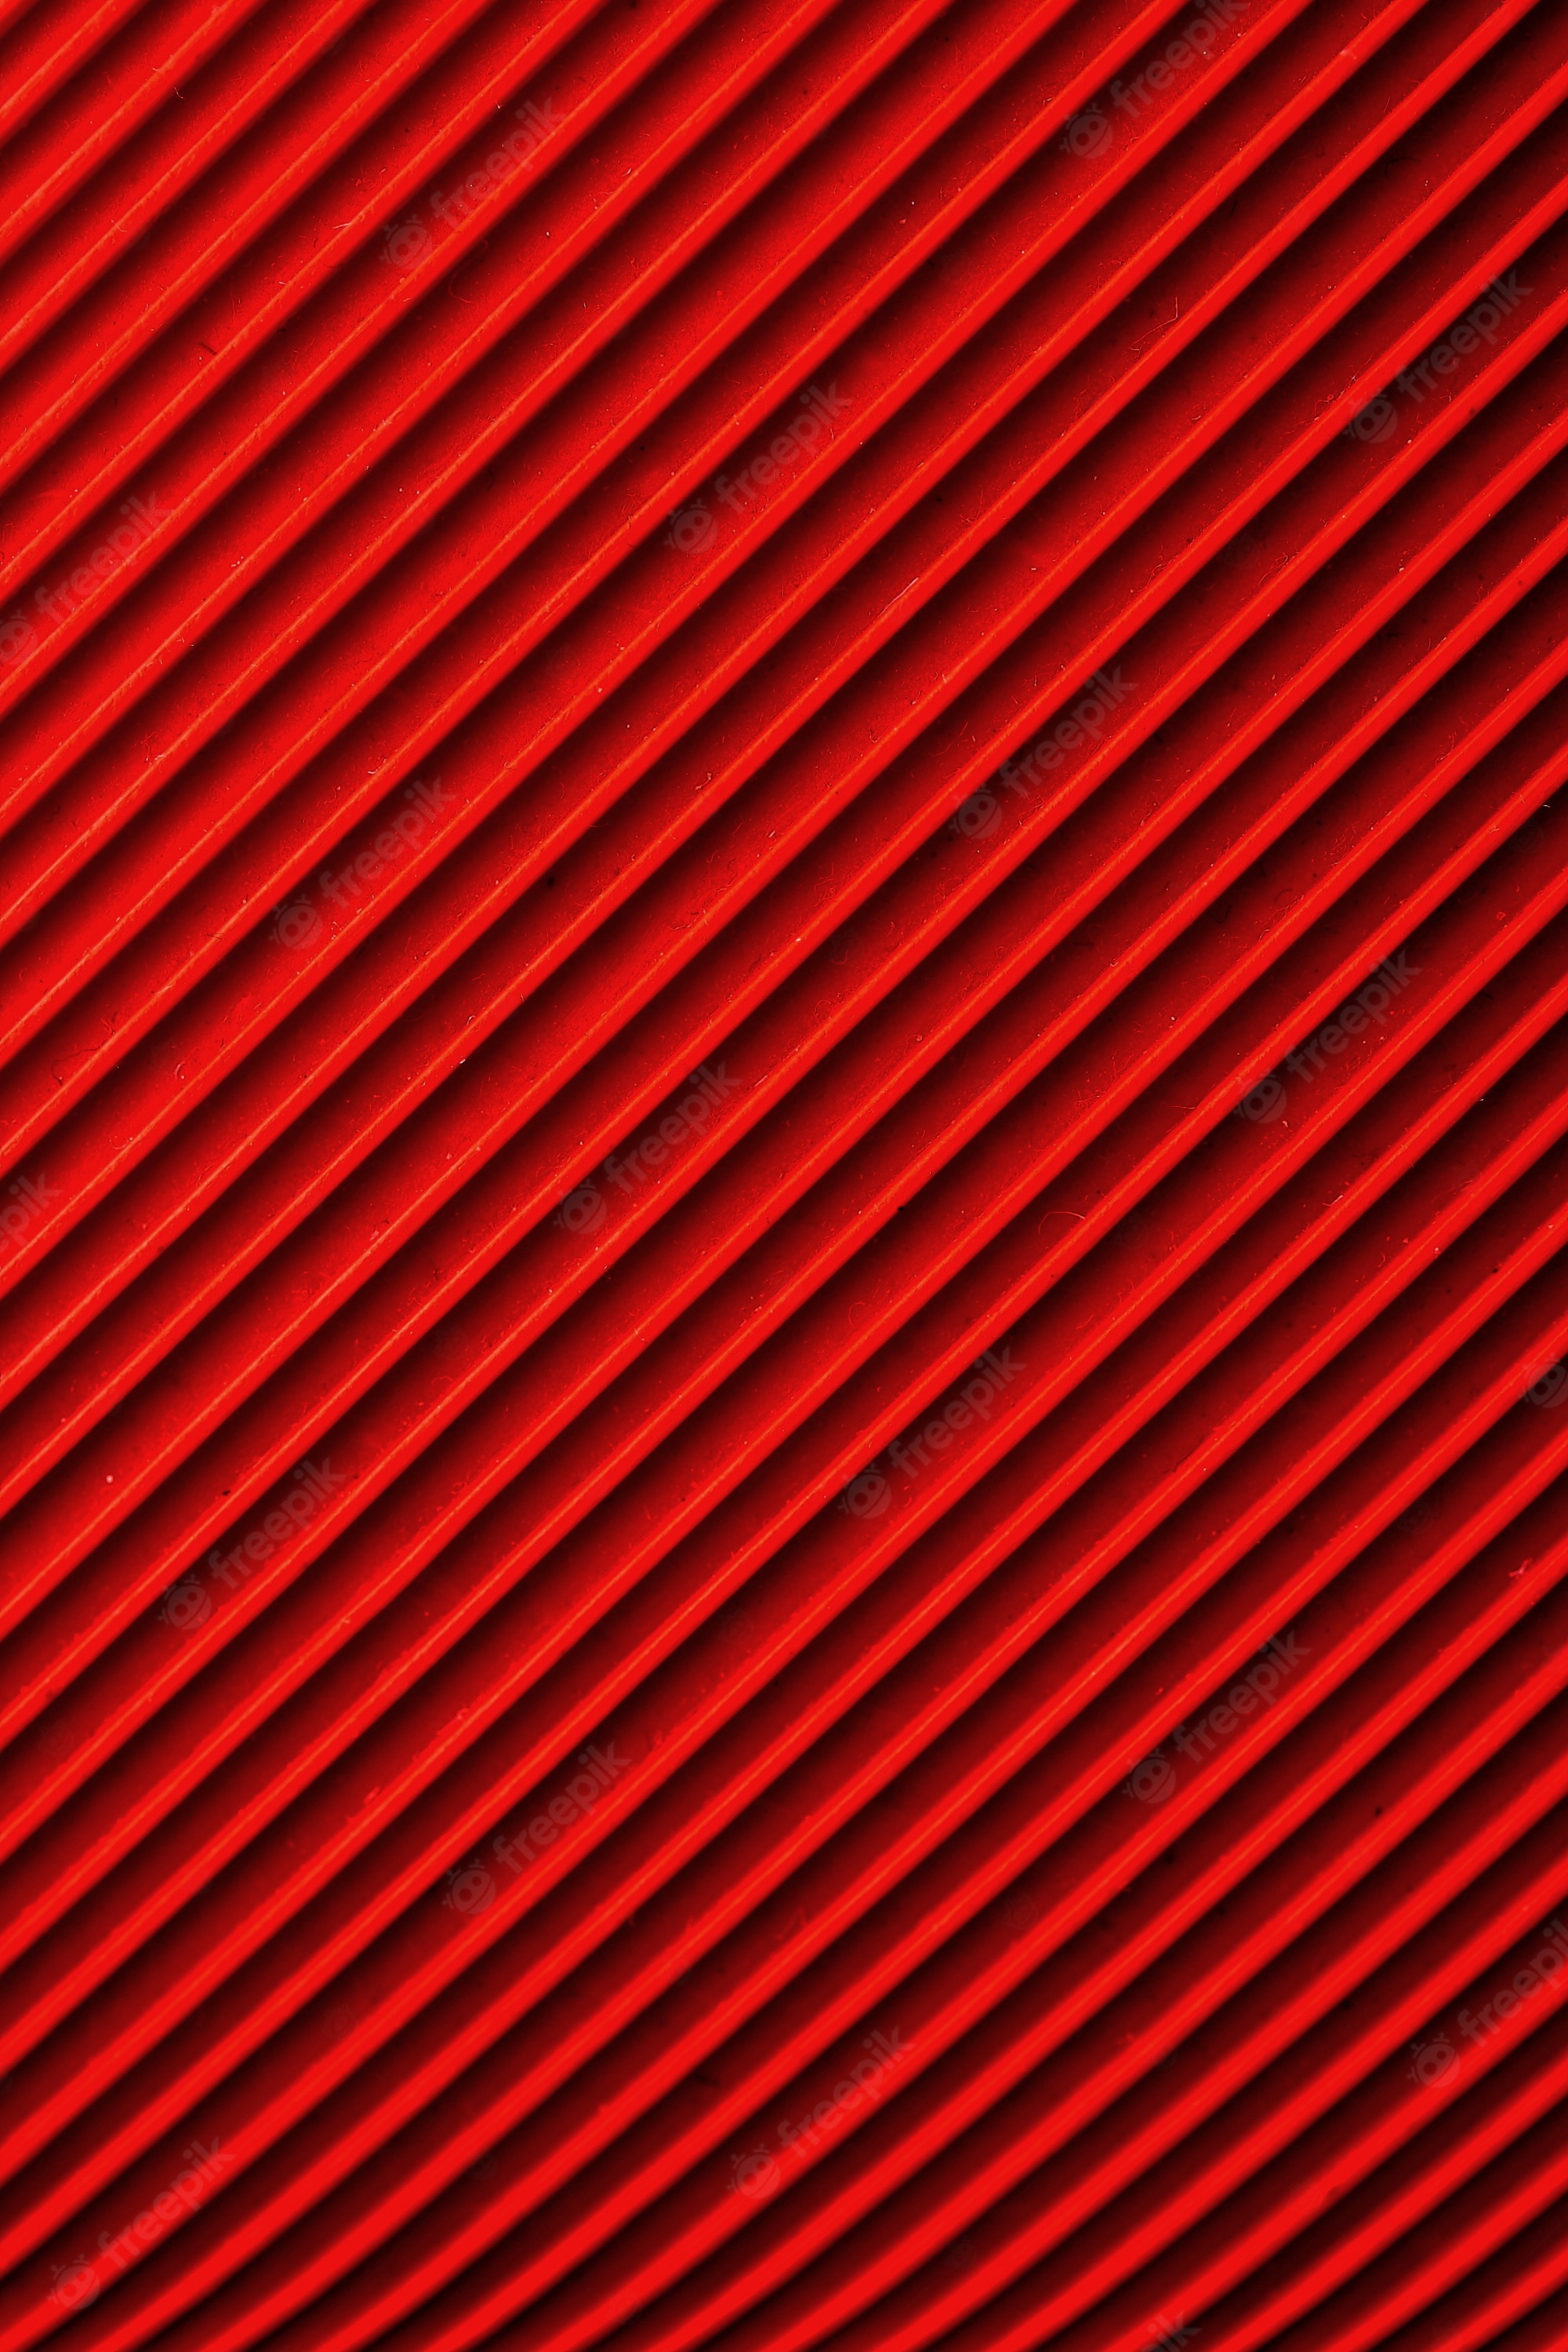 Red Stripes Image